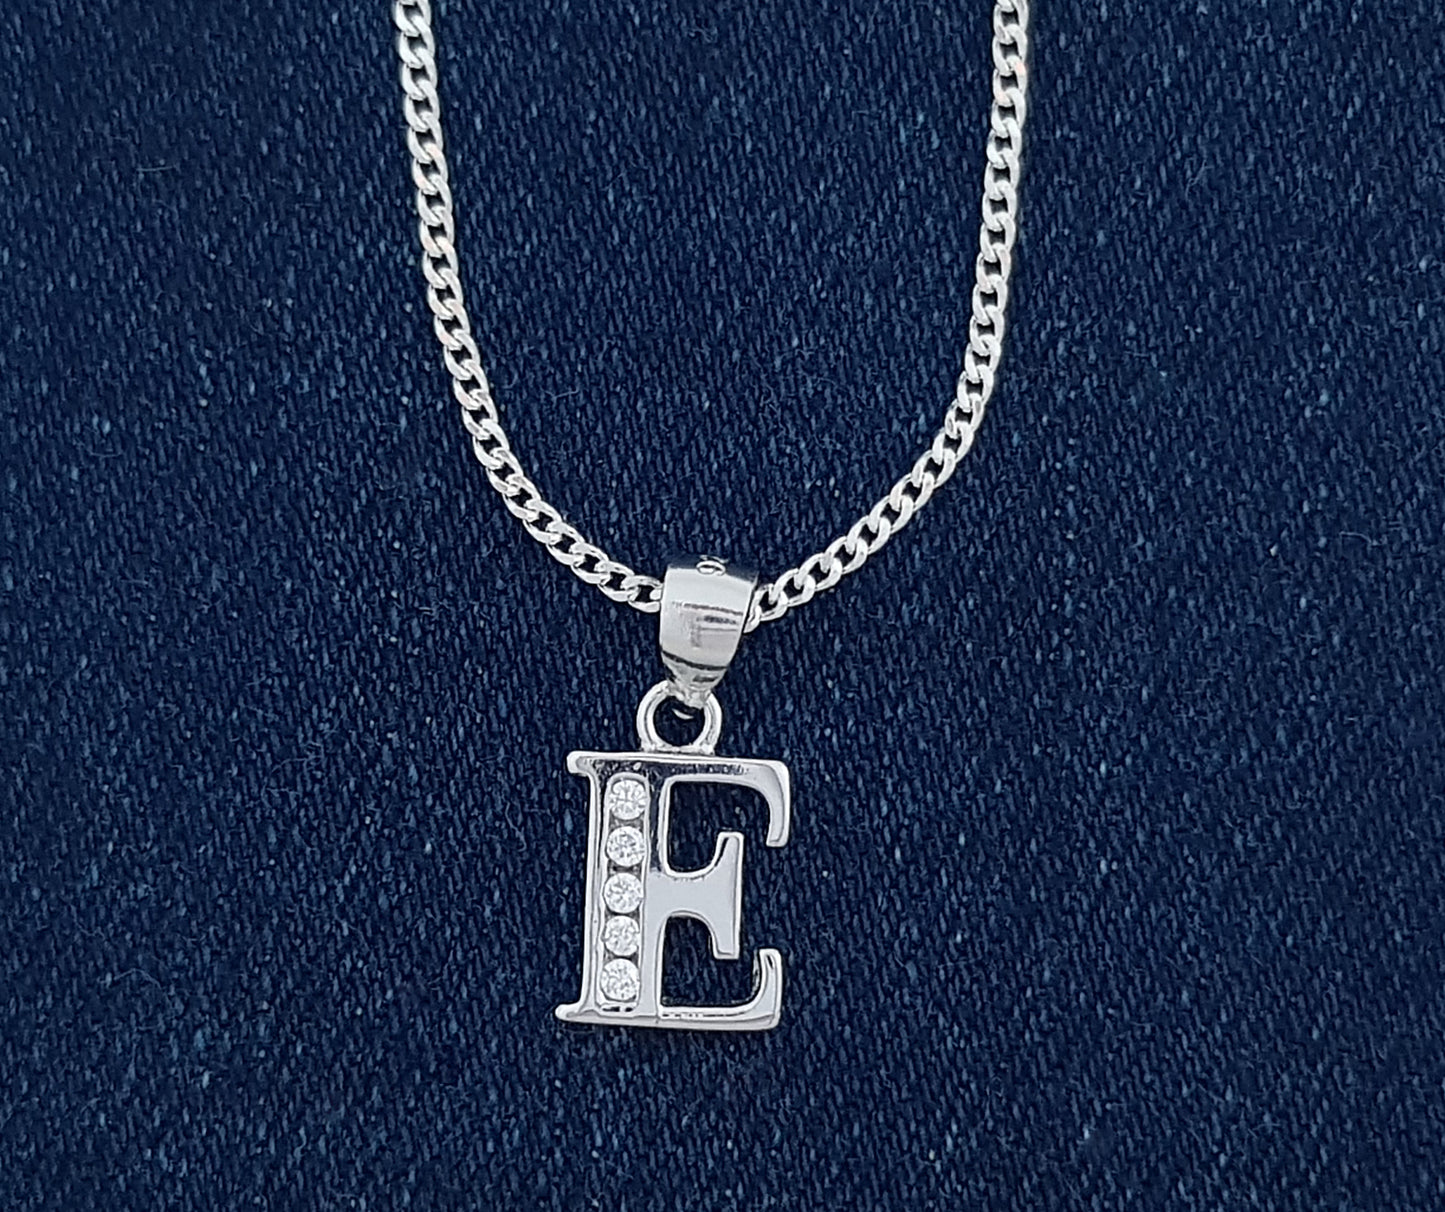 Sterling Silver Initial with Cubic Zirconia Stones- "E" Initial or Letter